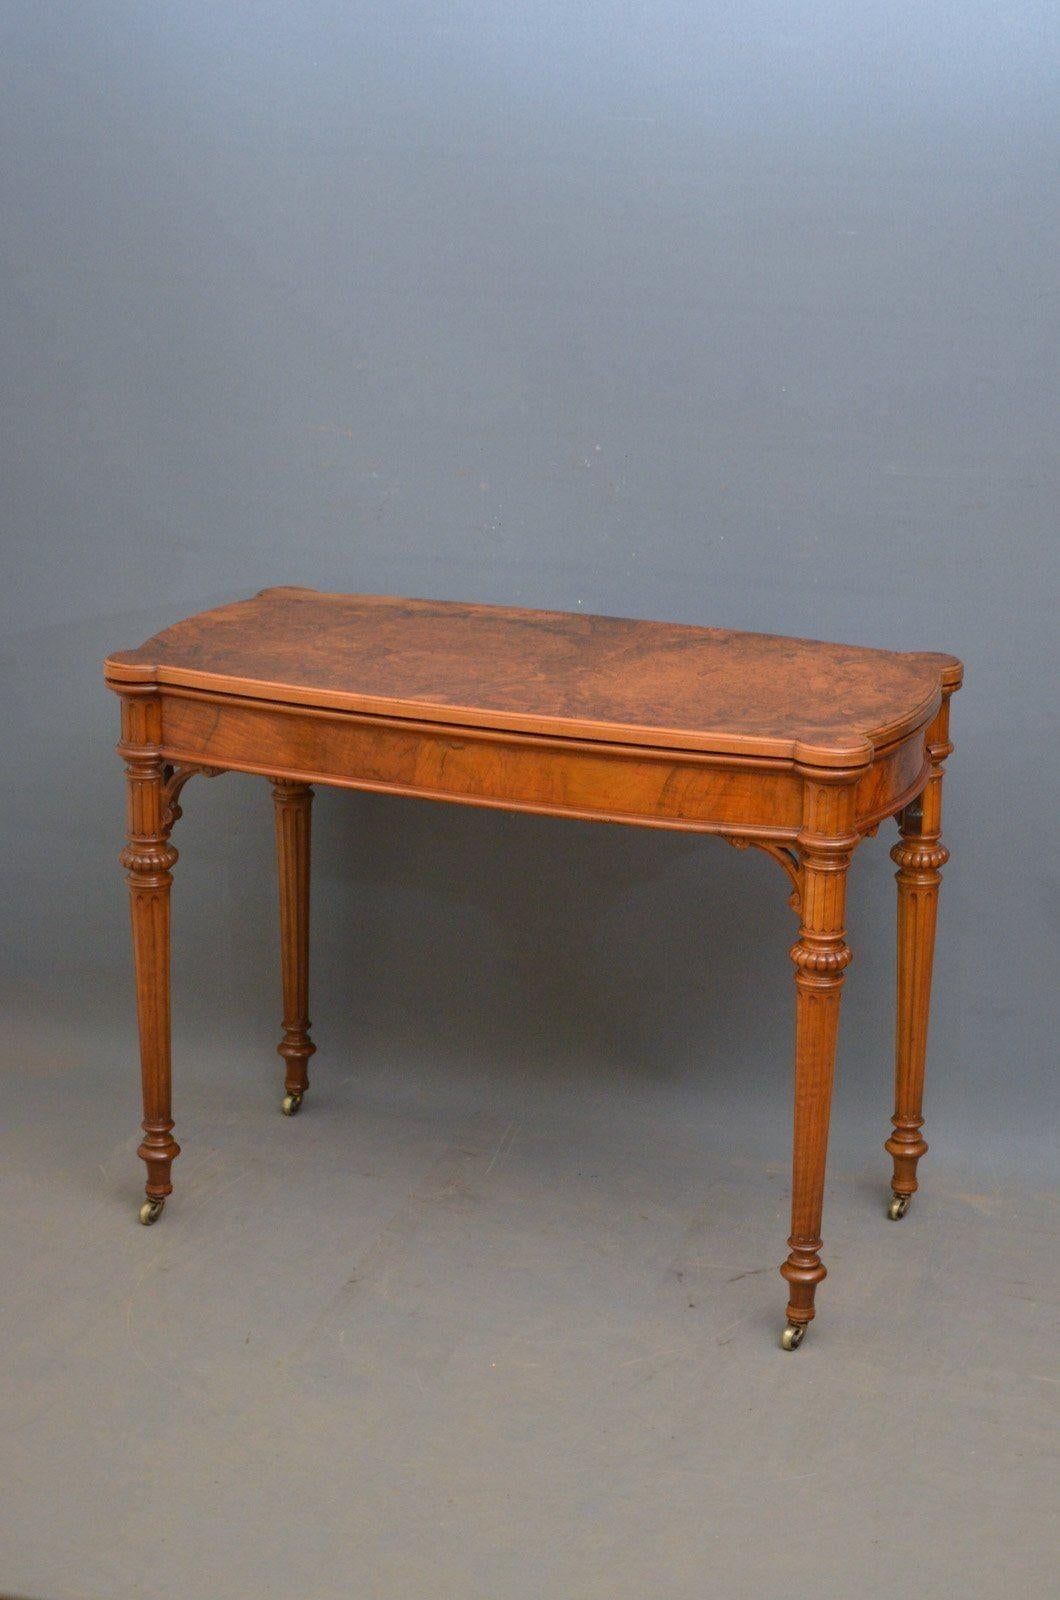 Sn4220 Victorian walnut card table, having stunning fold over top with baize games surface, standing on turned, fluted and carved tapered legs terminating in original brass castors. c1870
H29.5